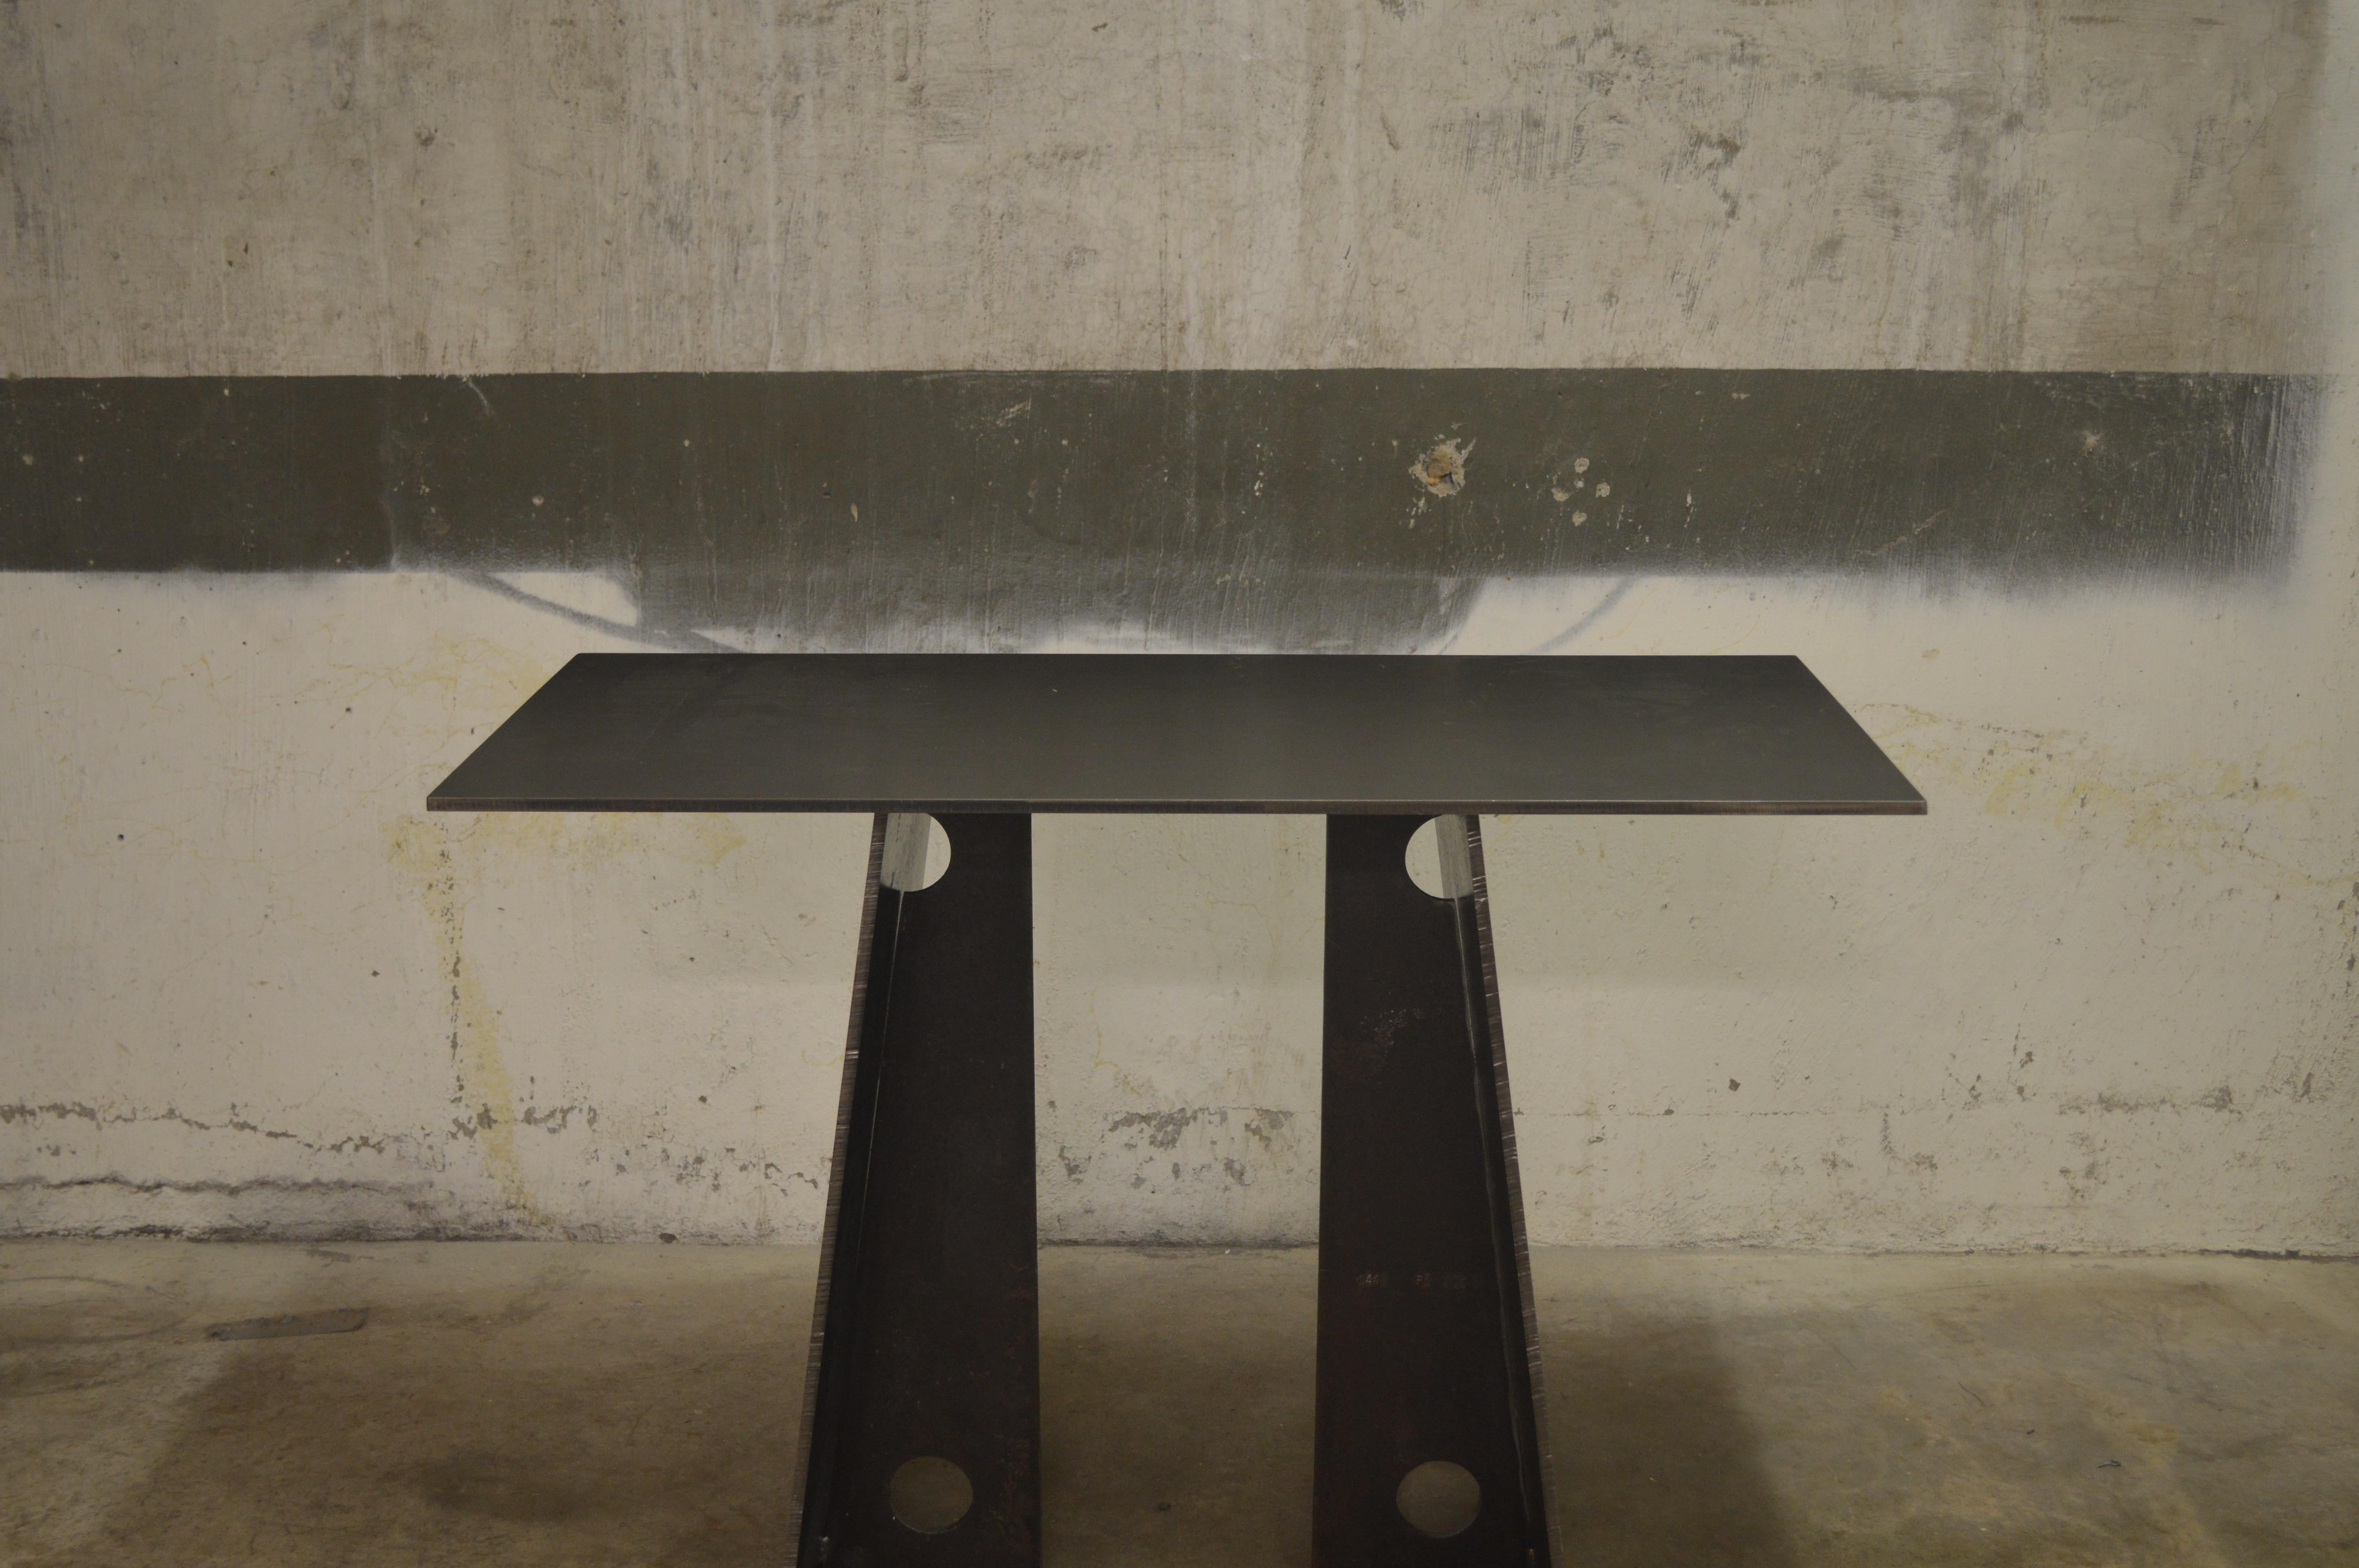 The Bridge Console, an original design, is a contemporary minimalist blackened steel console designed and produced in Vermont by Scott Gordon. Shown here using weathered 3/8